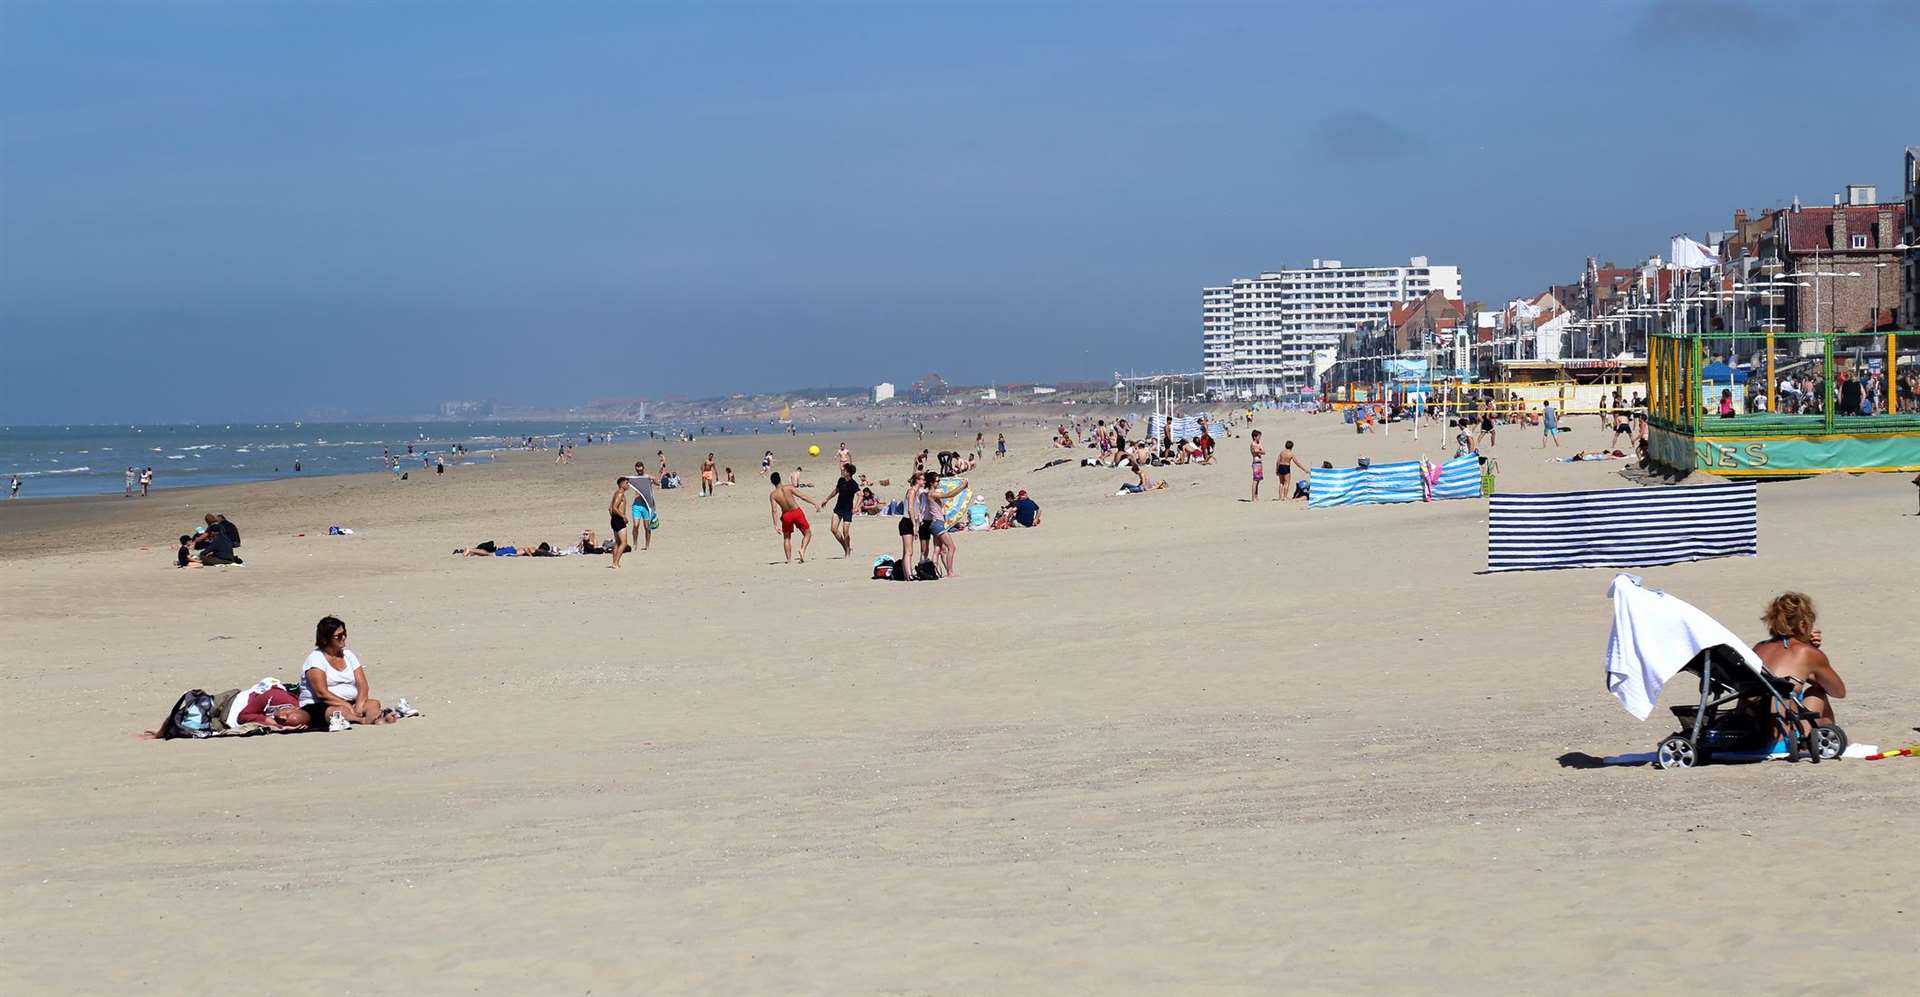 Famed for the heroic evacuation of Allied troops during WWII, today the sunny beach at Dunkirk's Malo les Bains beach resort welcomes thousands of visitors each year. It is only a 40 minute drive from Calais.